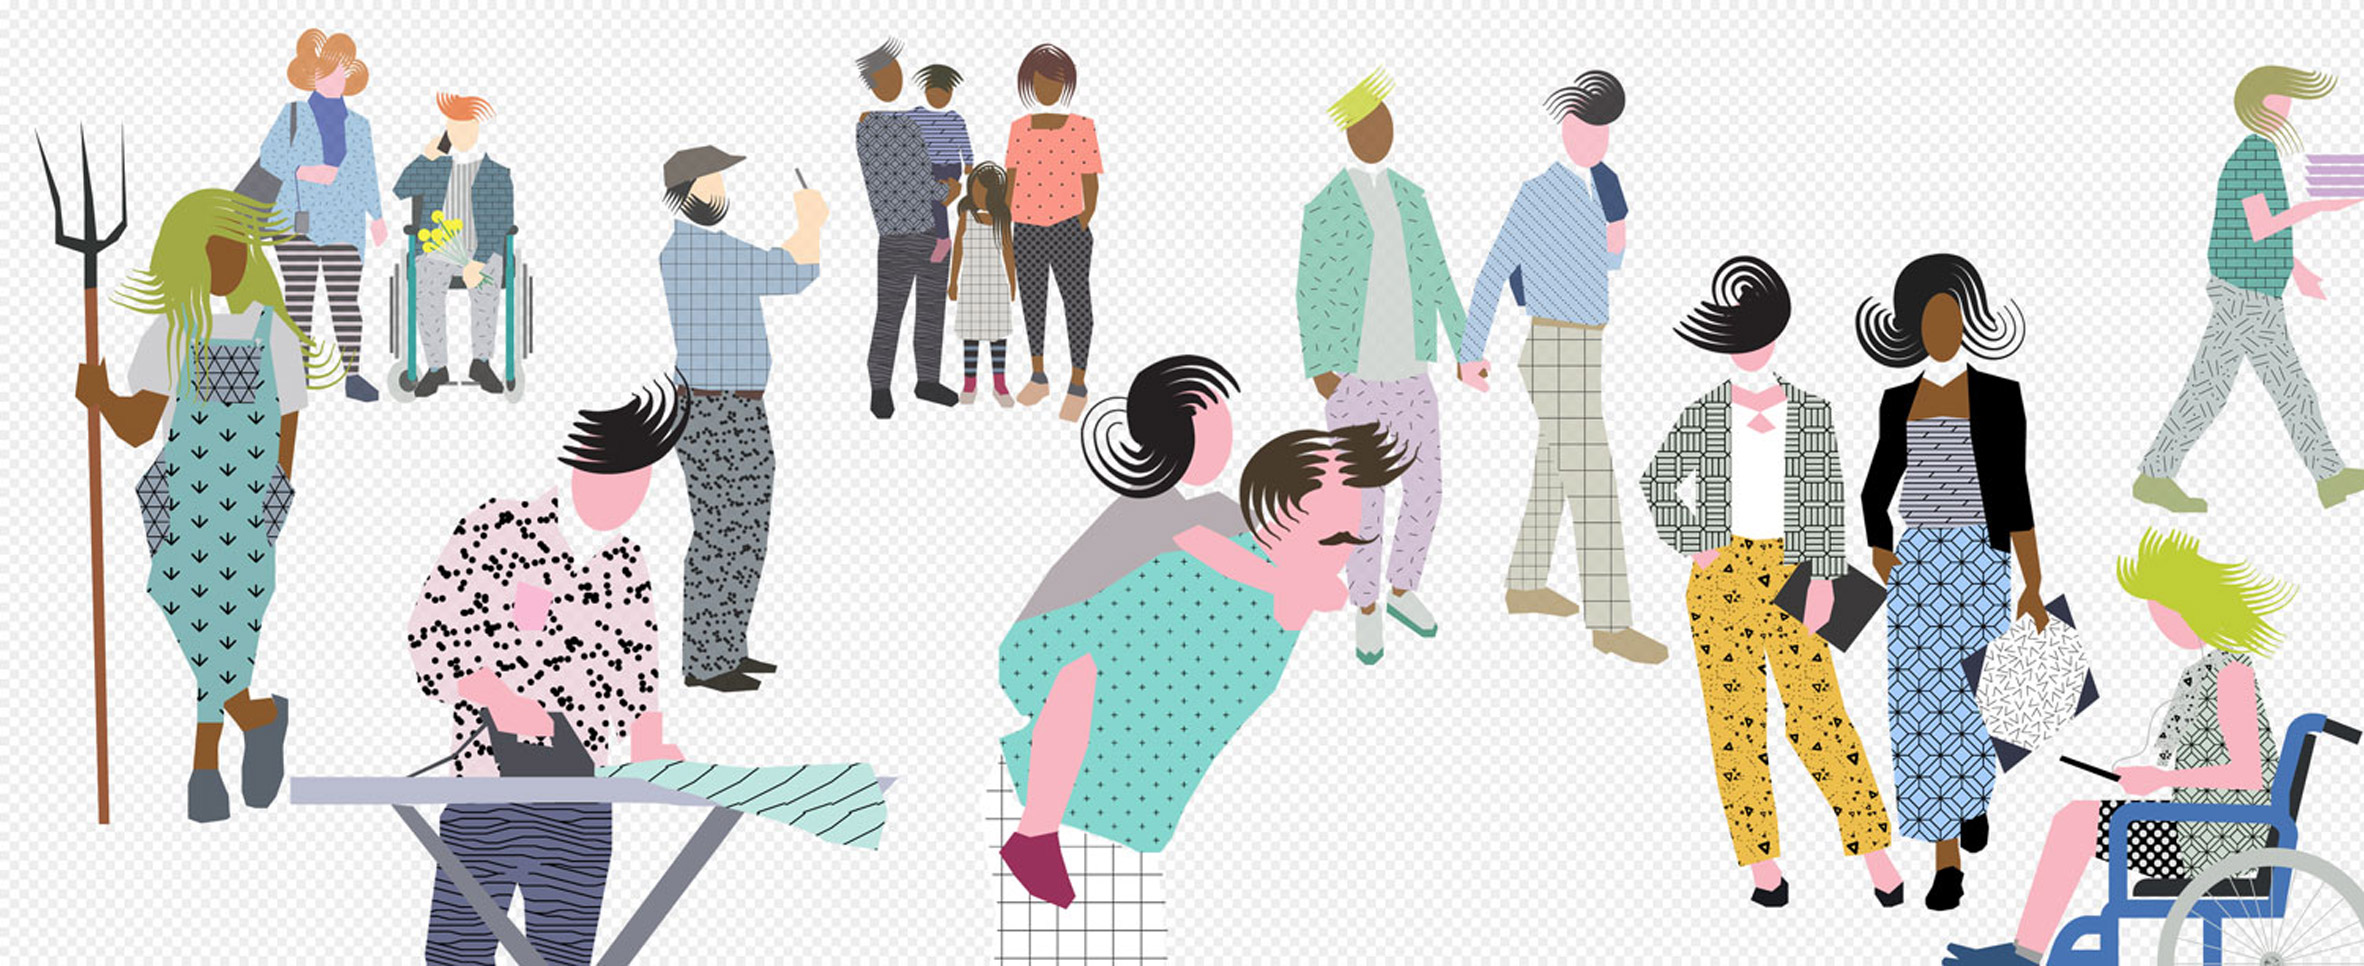 Graphic figures for digital renders embrace "post-digital drawing age"